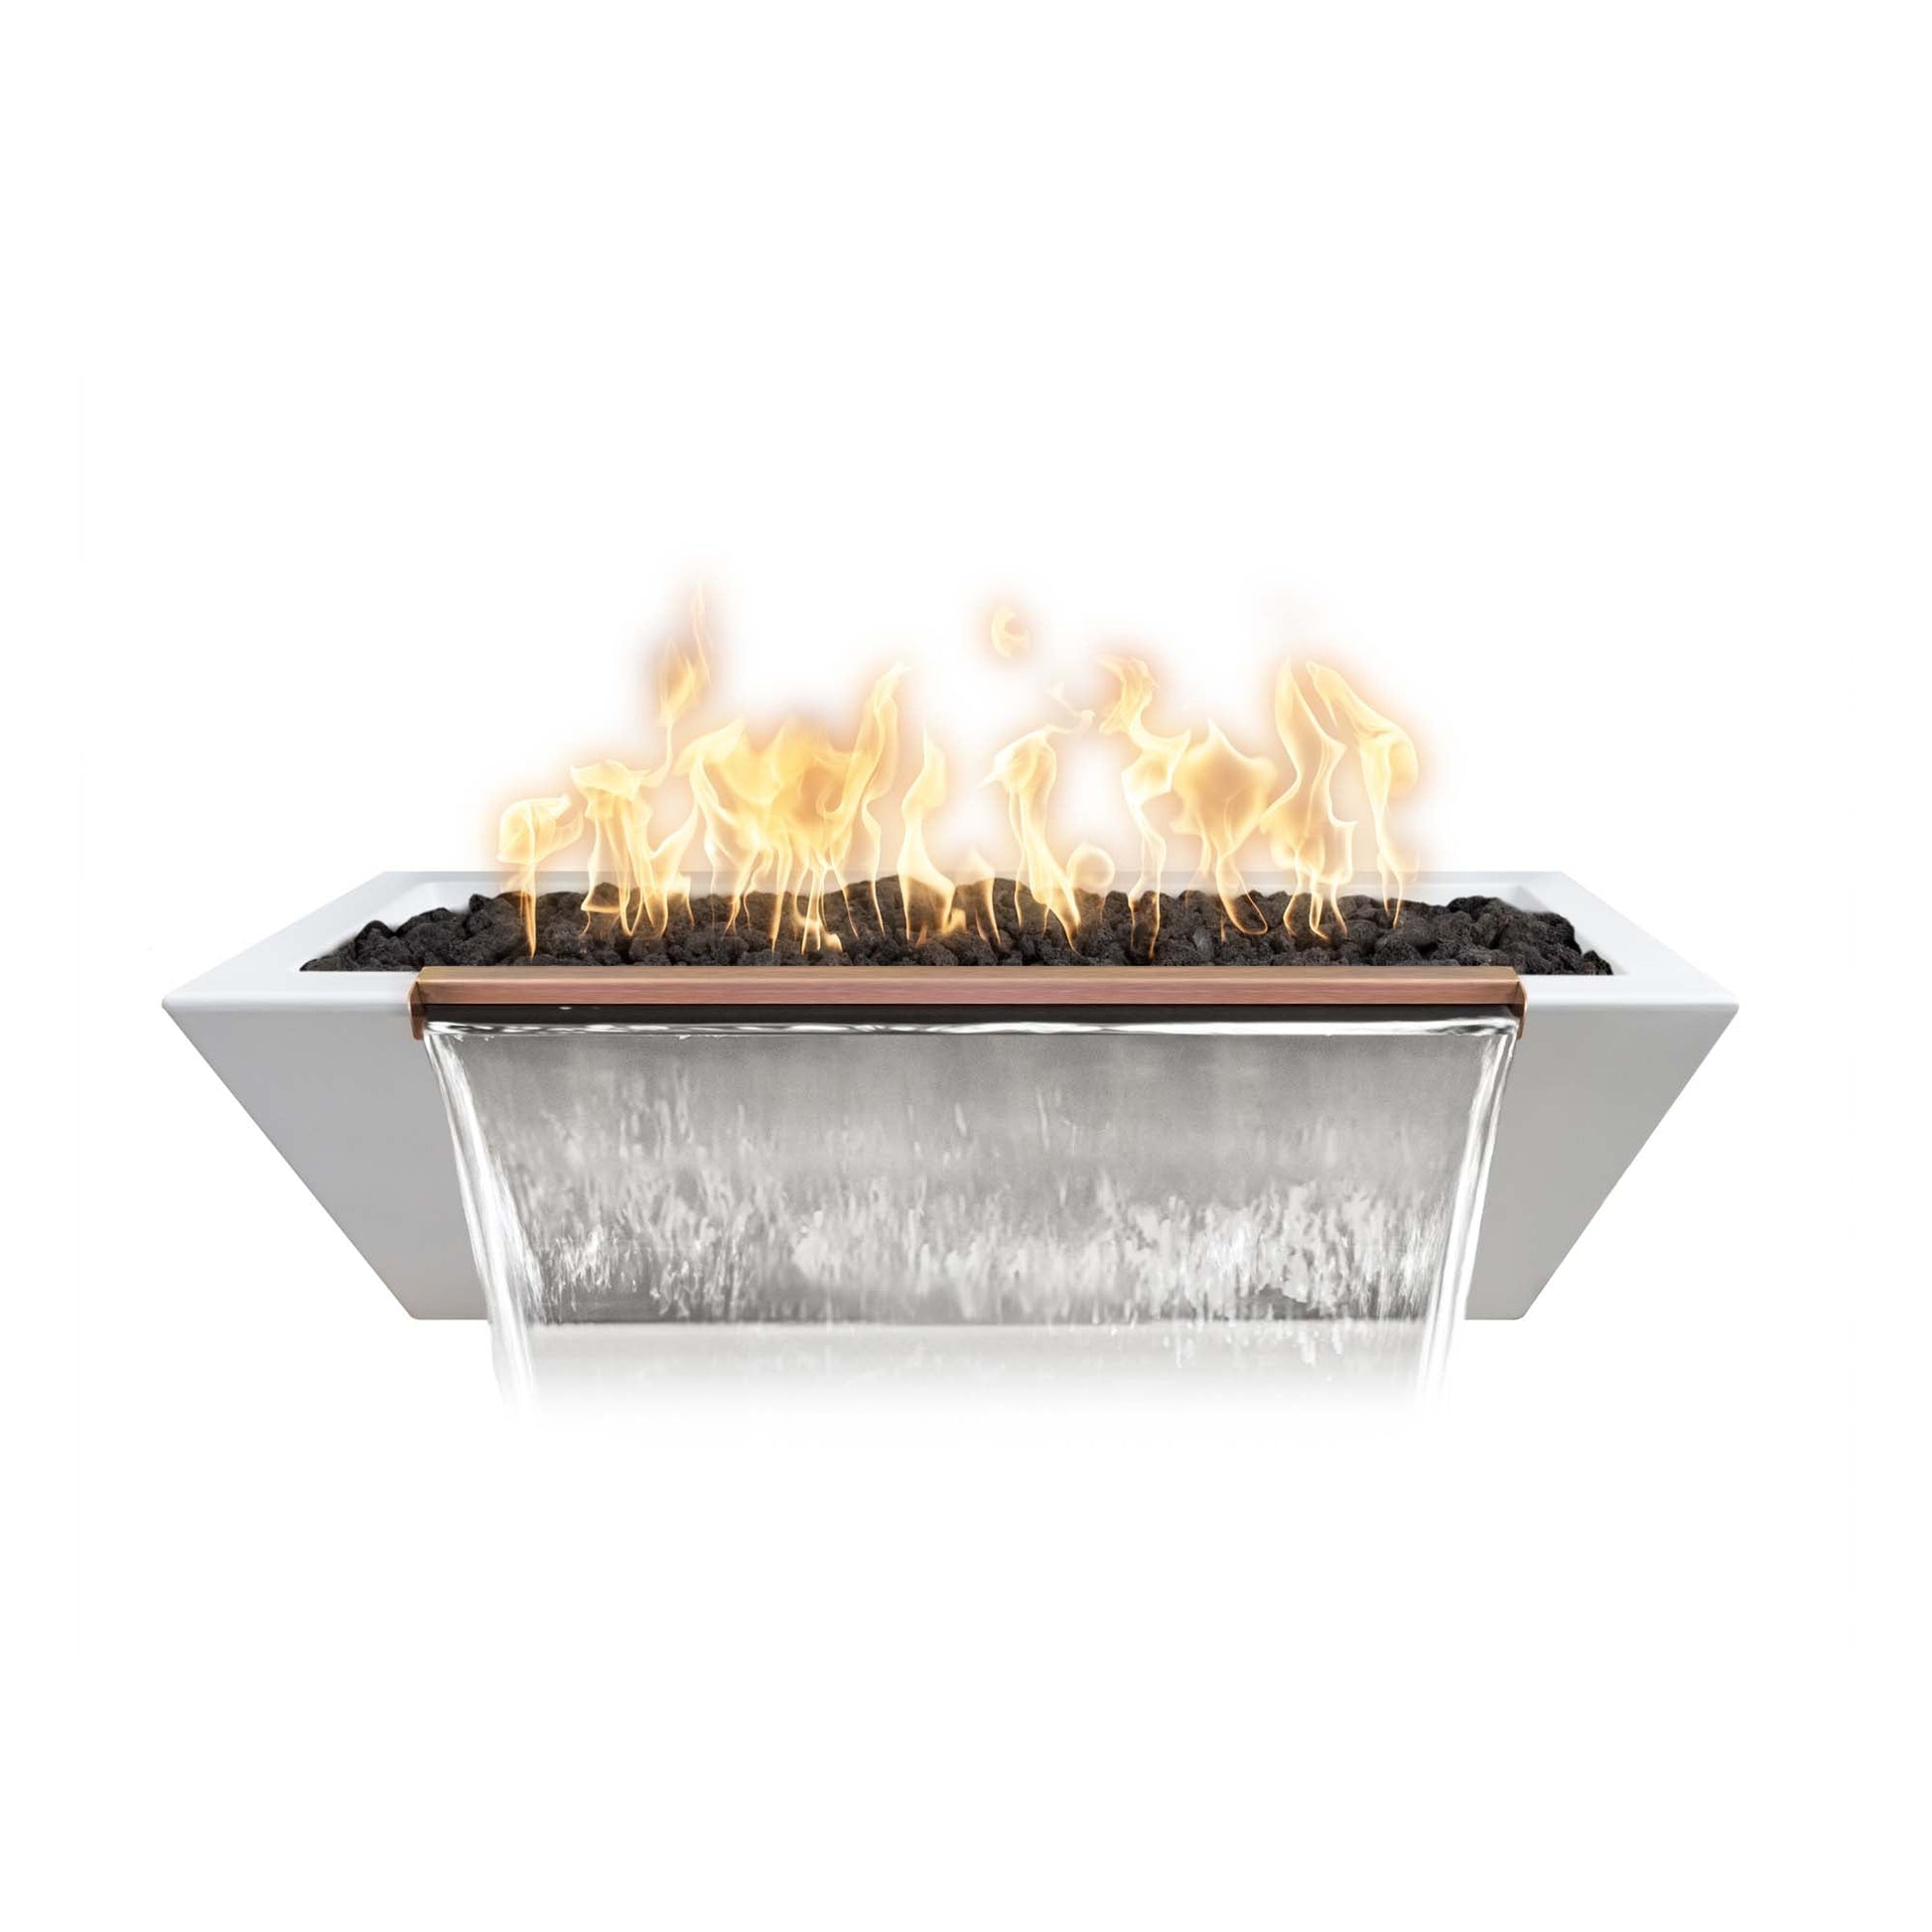 The Outdoor Plus Linear Maya 60" White GFRC Concrete Natural Gas Fire & Water Bowl with Match Lit with Flame Sense Ignition